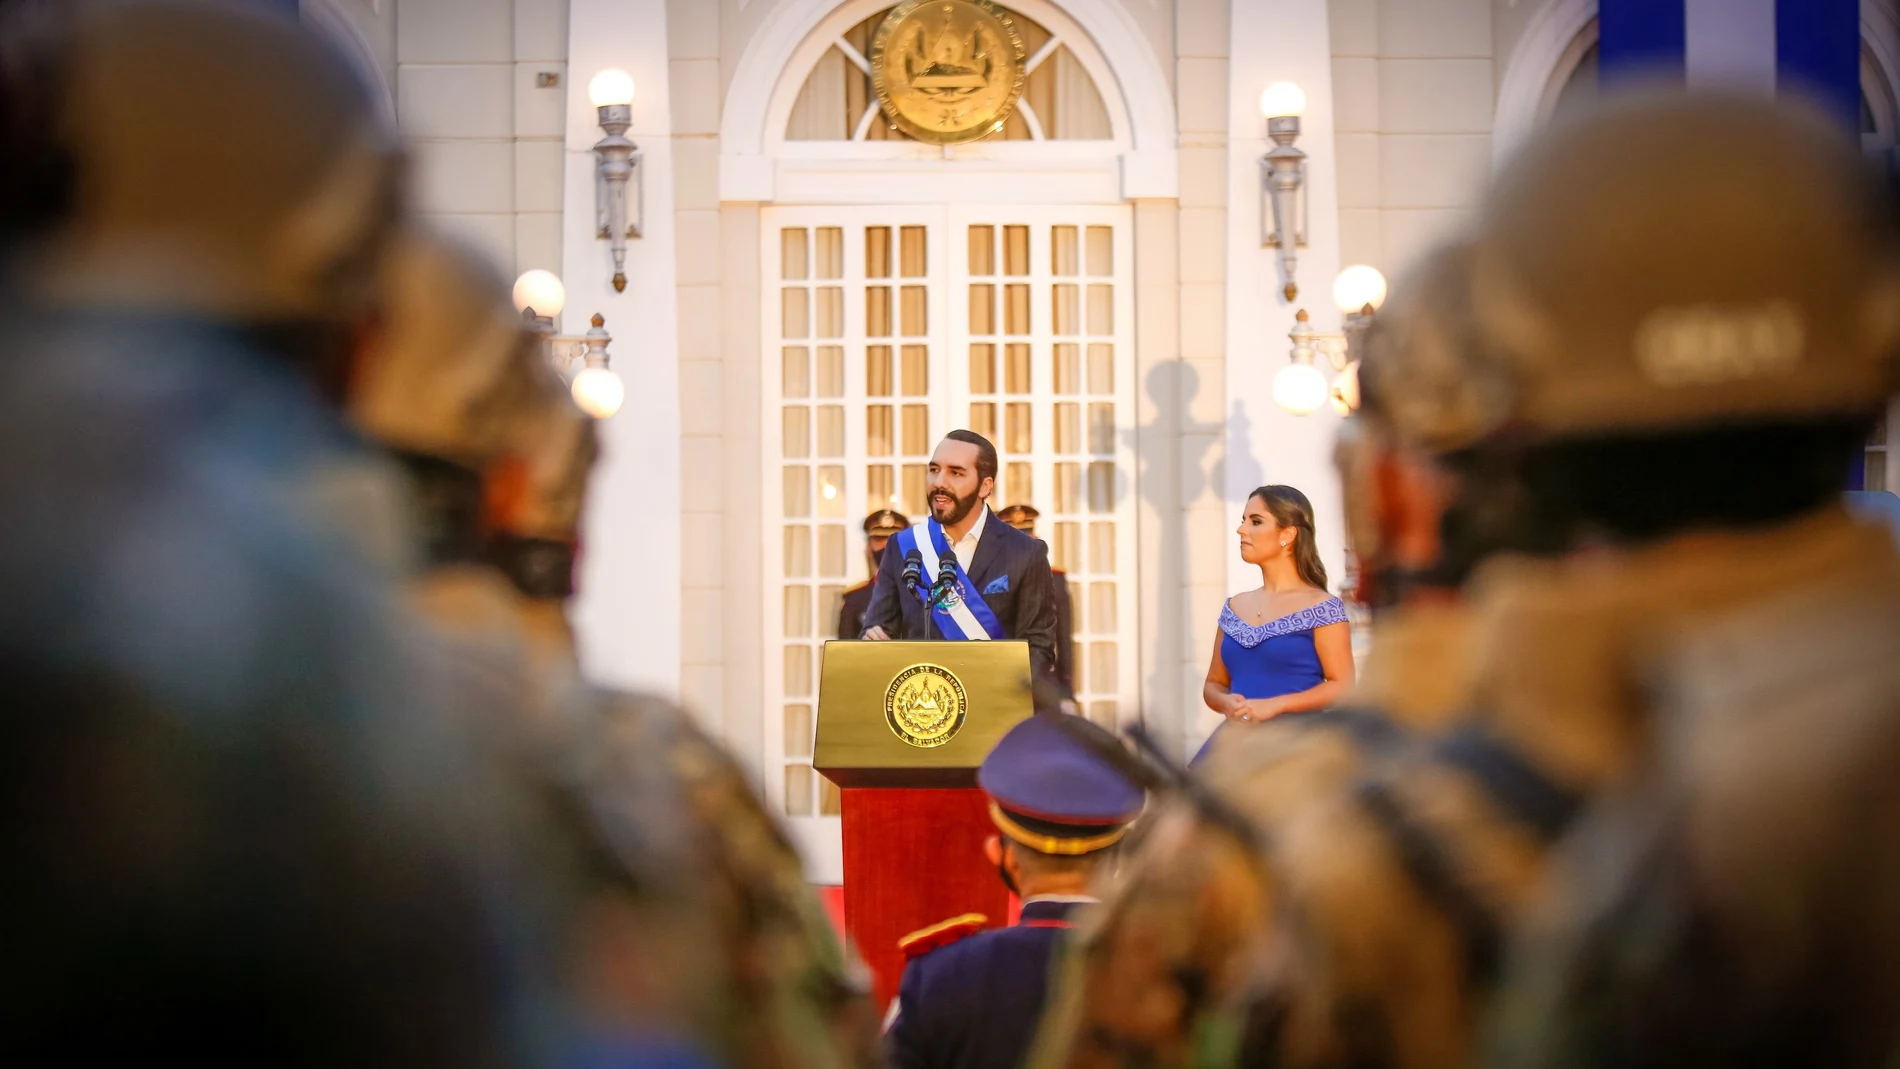 El Salvador's President Nayib Bukele takes part in a ceremony to celebrate the independency bicentennial at the Presidential House in San Salvador, El Salvador September 15, 2021. Picture taken September 15, 2021. Secretaria de Prensa de La Presidencia/Handout via REUTERS ATTENTION EDITORS - THIS IMAGE WAS PROVIDED BY A THIRD PARTY. NO RESALES. NO ARCHIVES